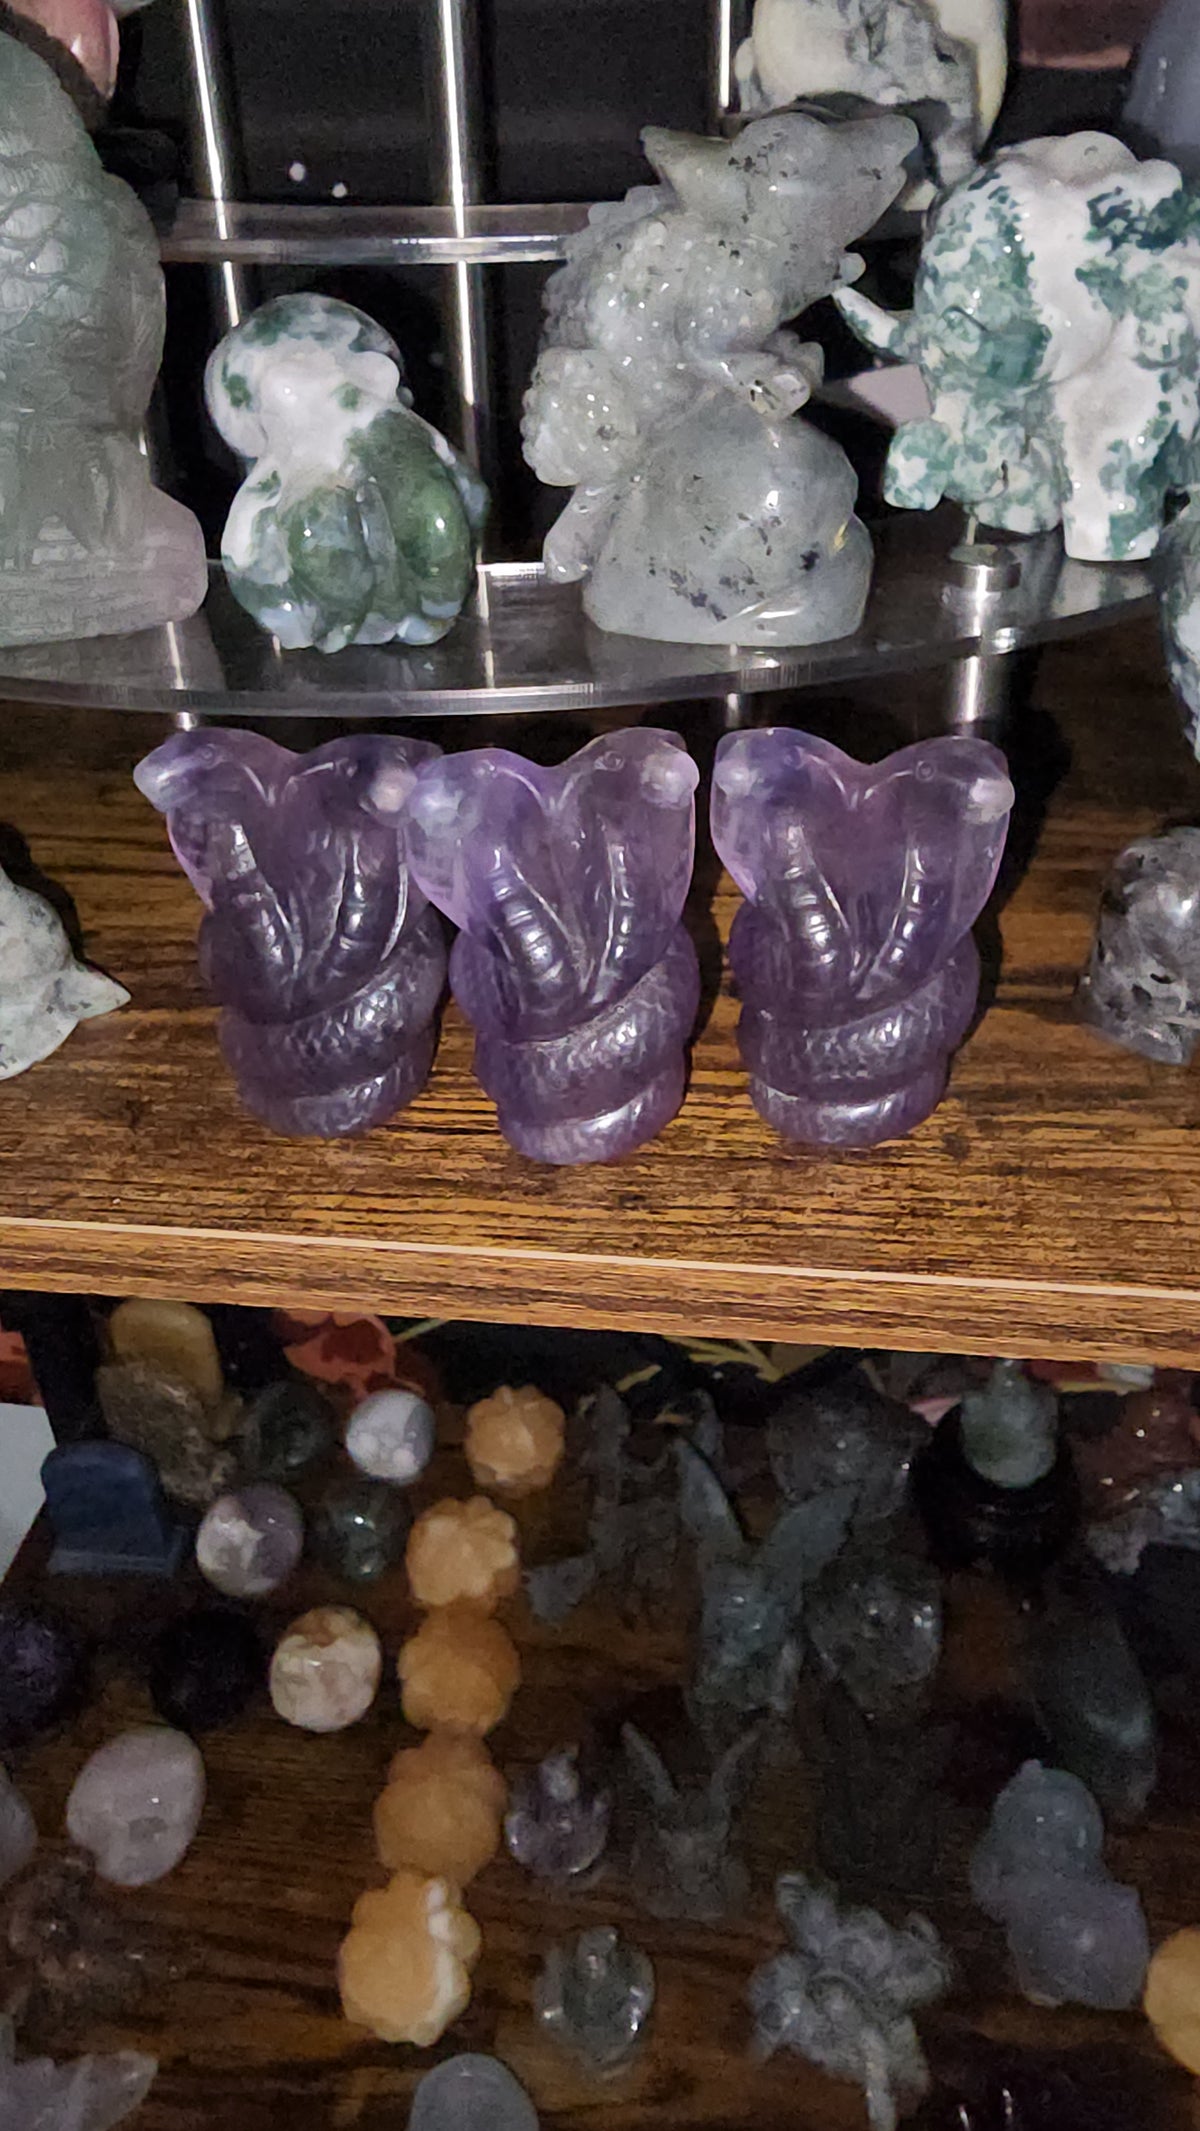 Fluorite two-headed snakes crystal carving